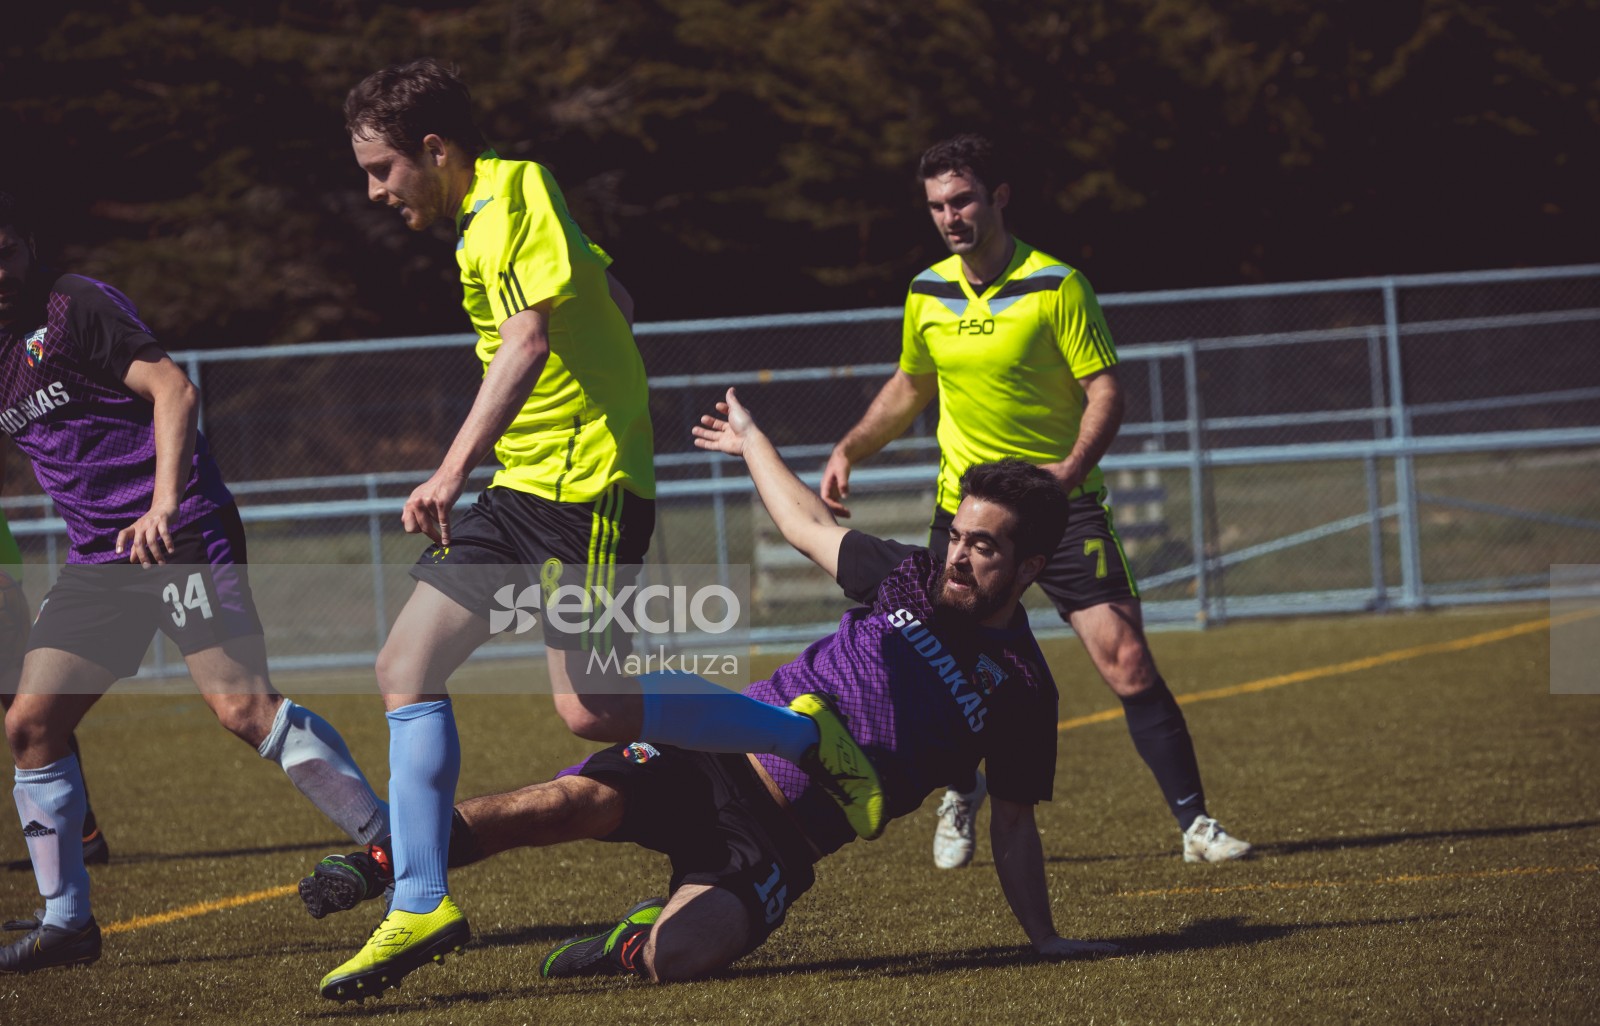 Player No. 15 in purple shirt slide tackle opponent - Sports Zone sunday league